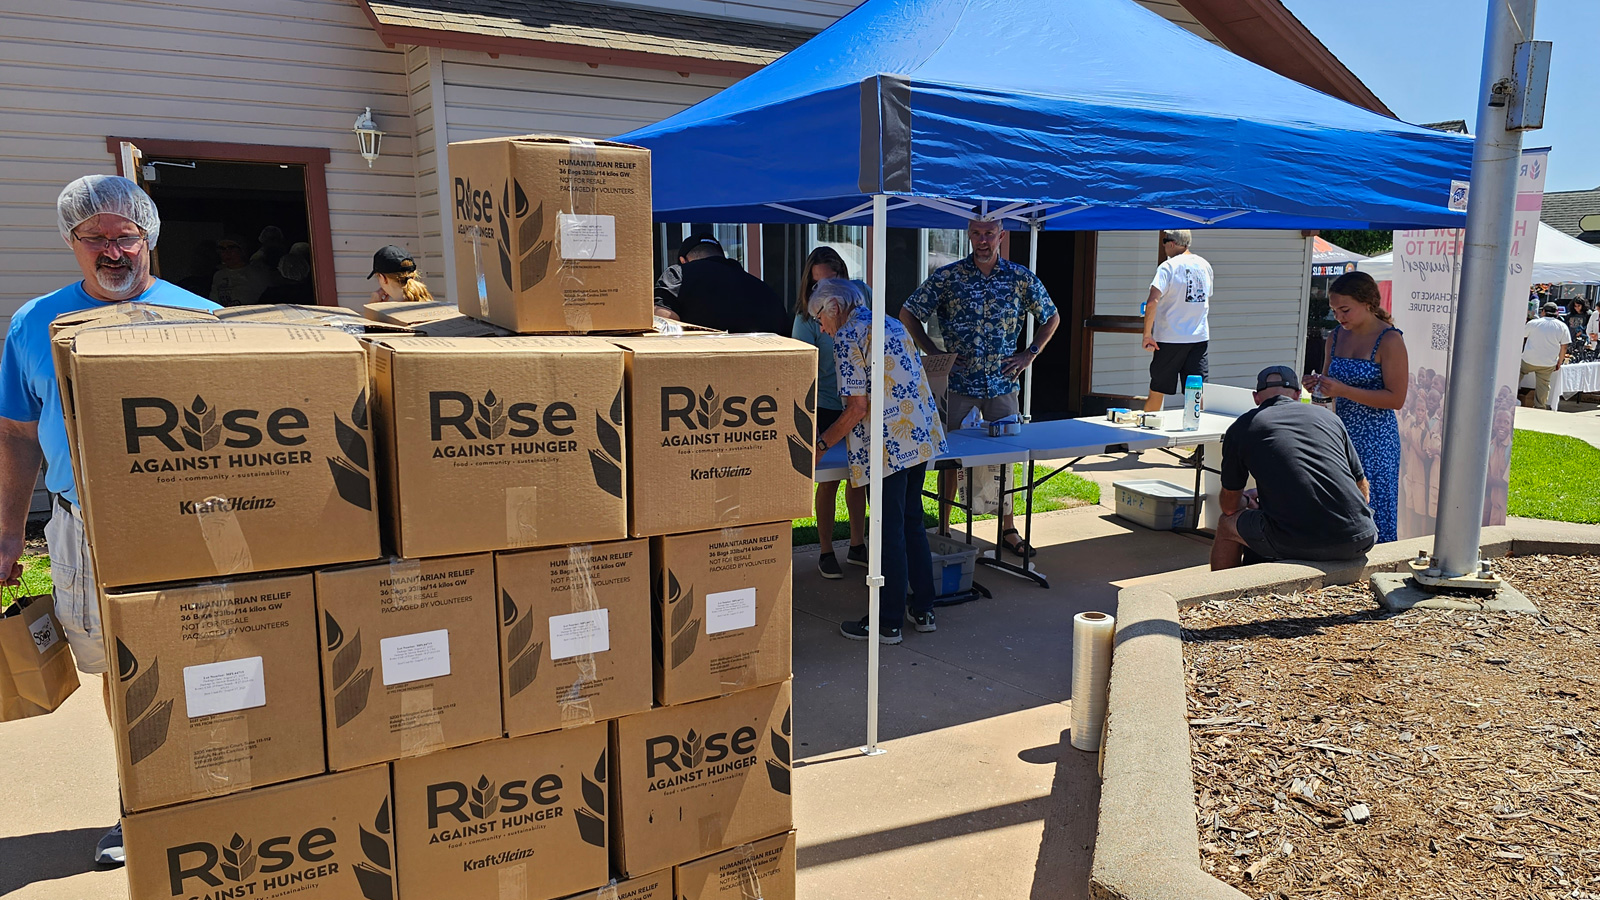 Boxes stacked for Rise Against Hunger event.